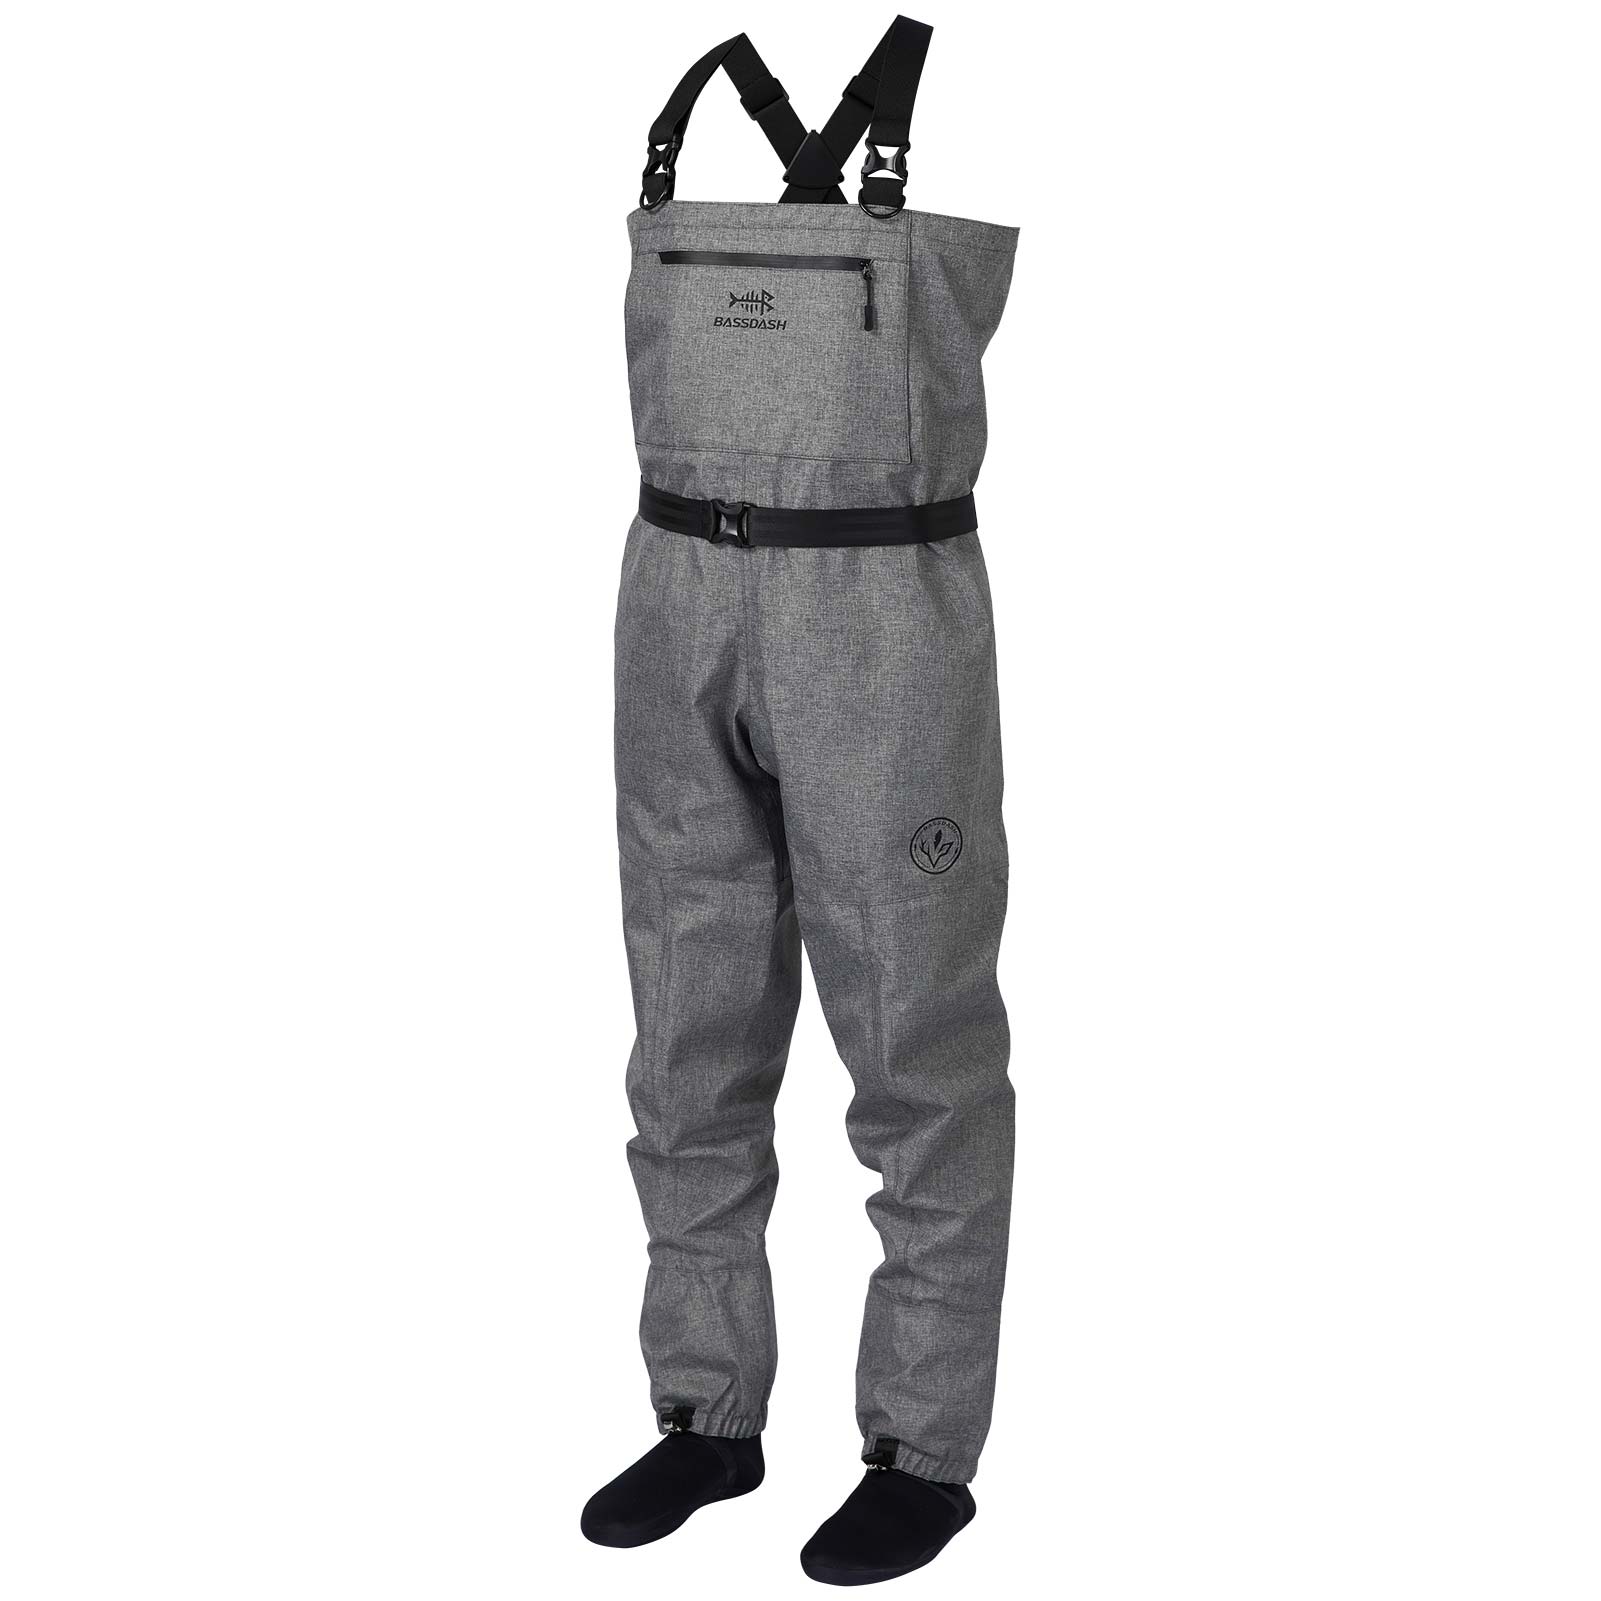  BASSDASH IMMERSE Men's Breathable Fly Fishing Waders Stocking  Foot Waterproof Lightweight Chest Wader : Sports & Outdoors